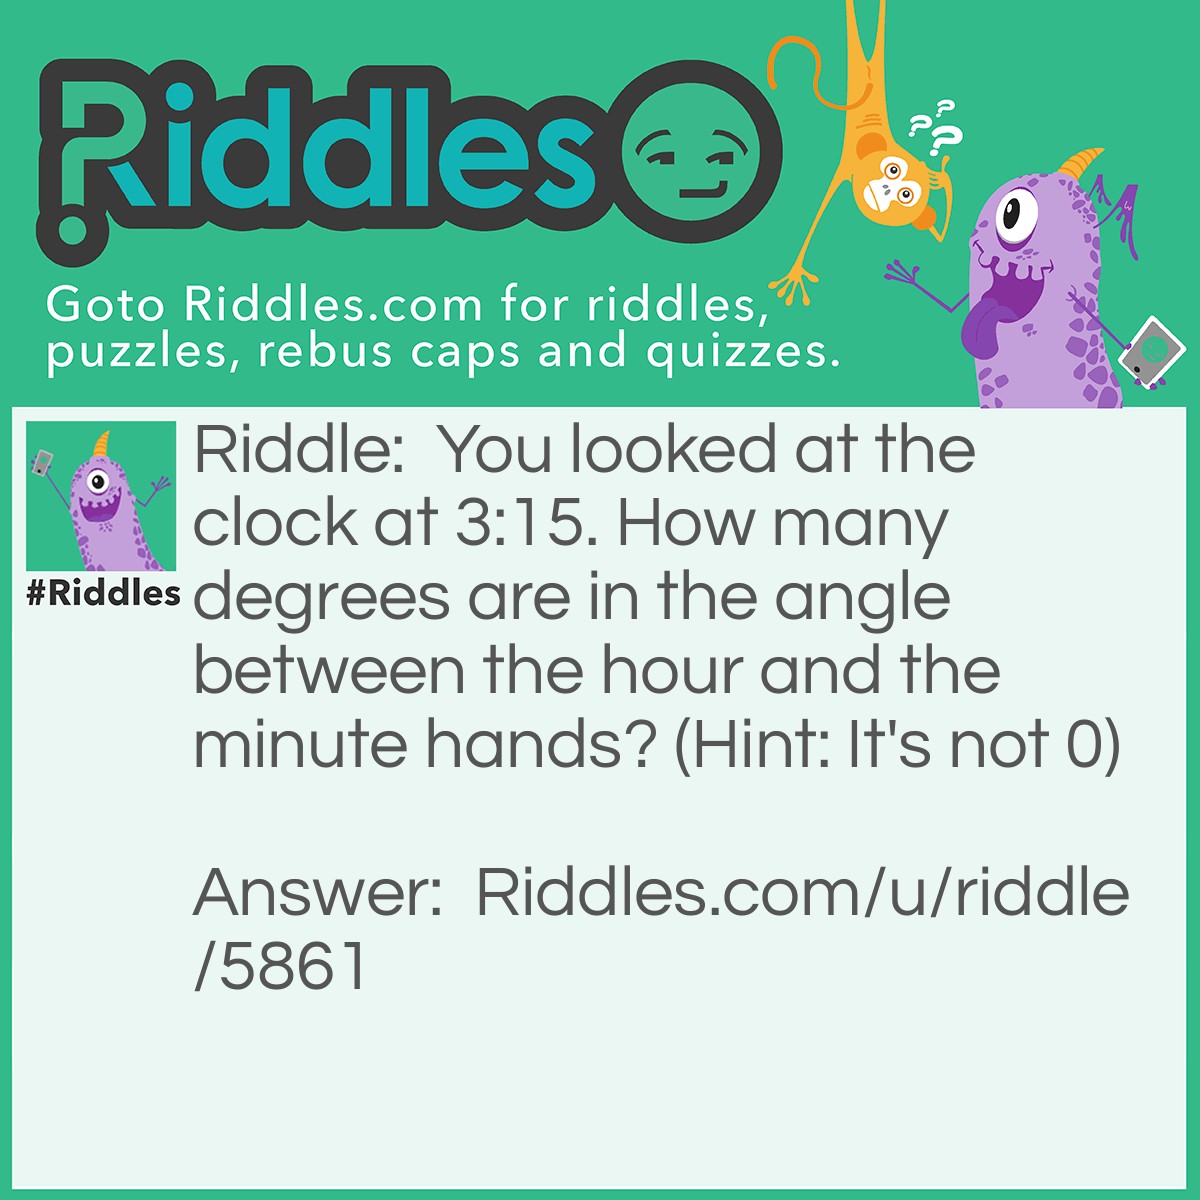 Riddle: You looked at the clock at 3:15. How many degrees are in the angle between the hour and the minute hands? (Hint: It's not 0) Answer: 7.5 degrees. Ask anyone this. No one will get it. You'll stump them!